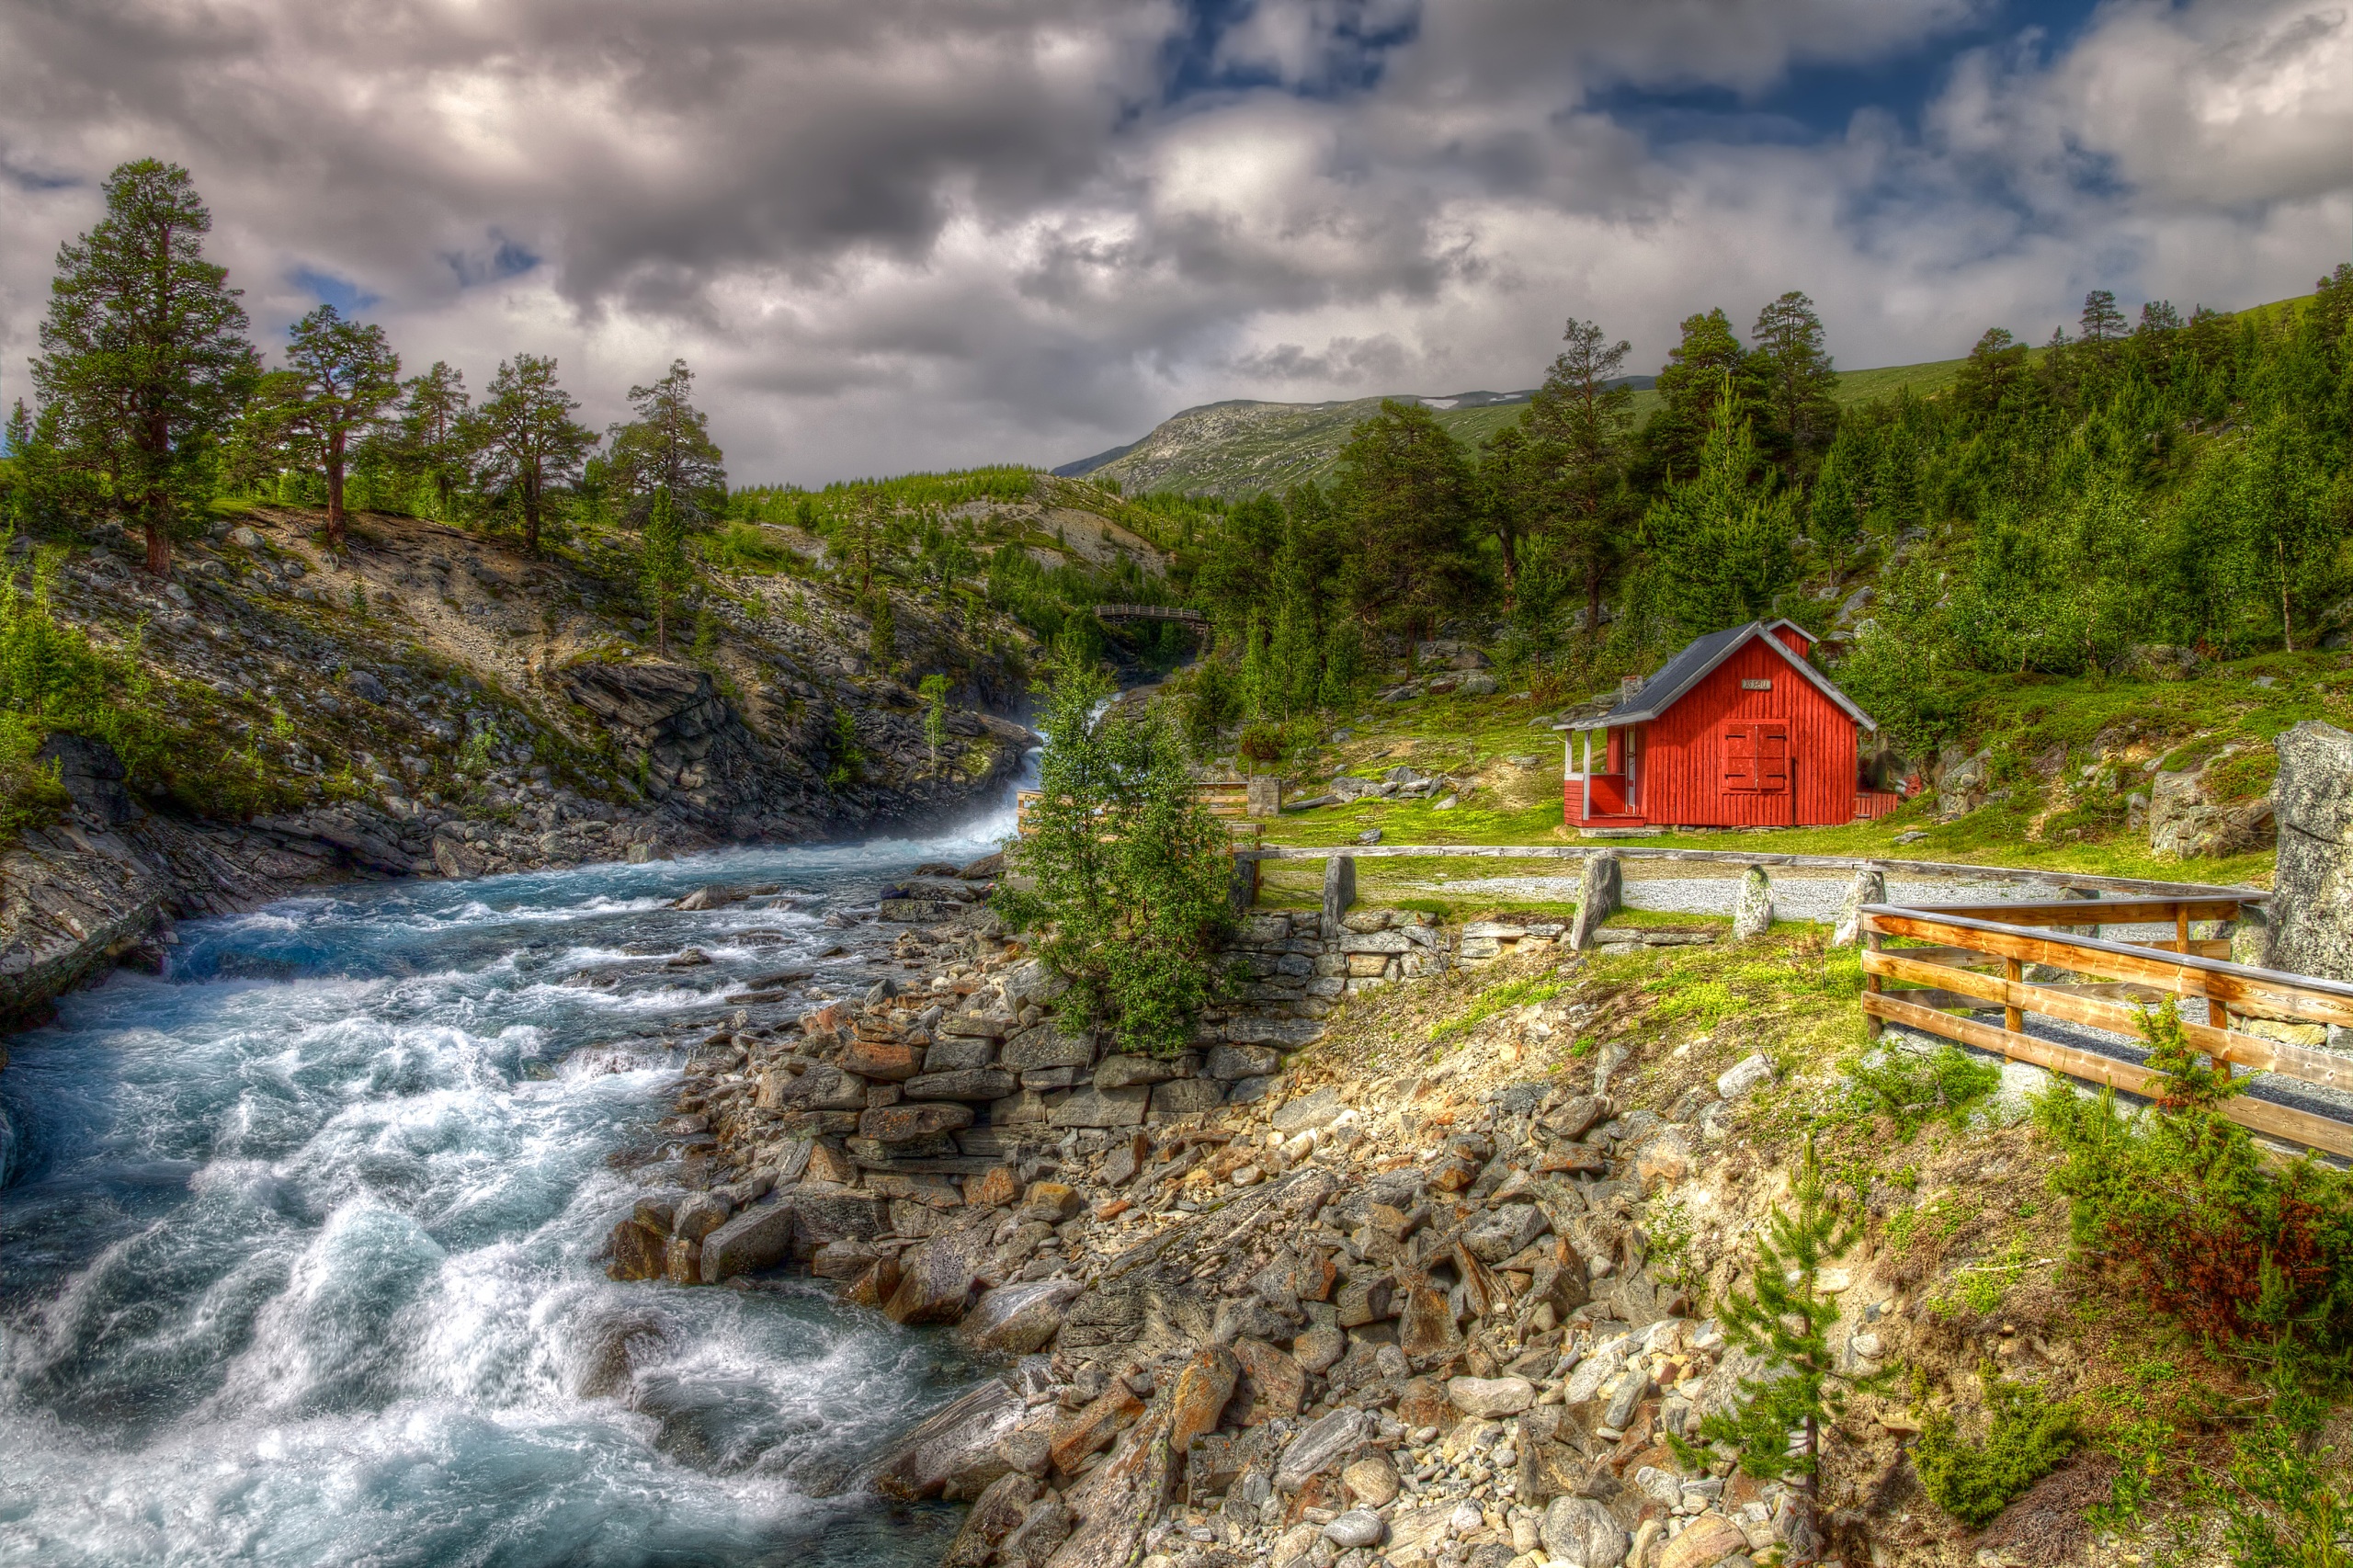 norway, man made, house, landscape, river, tree